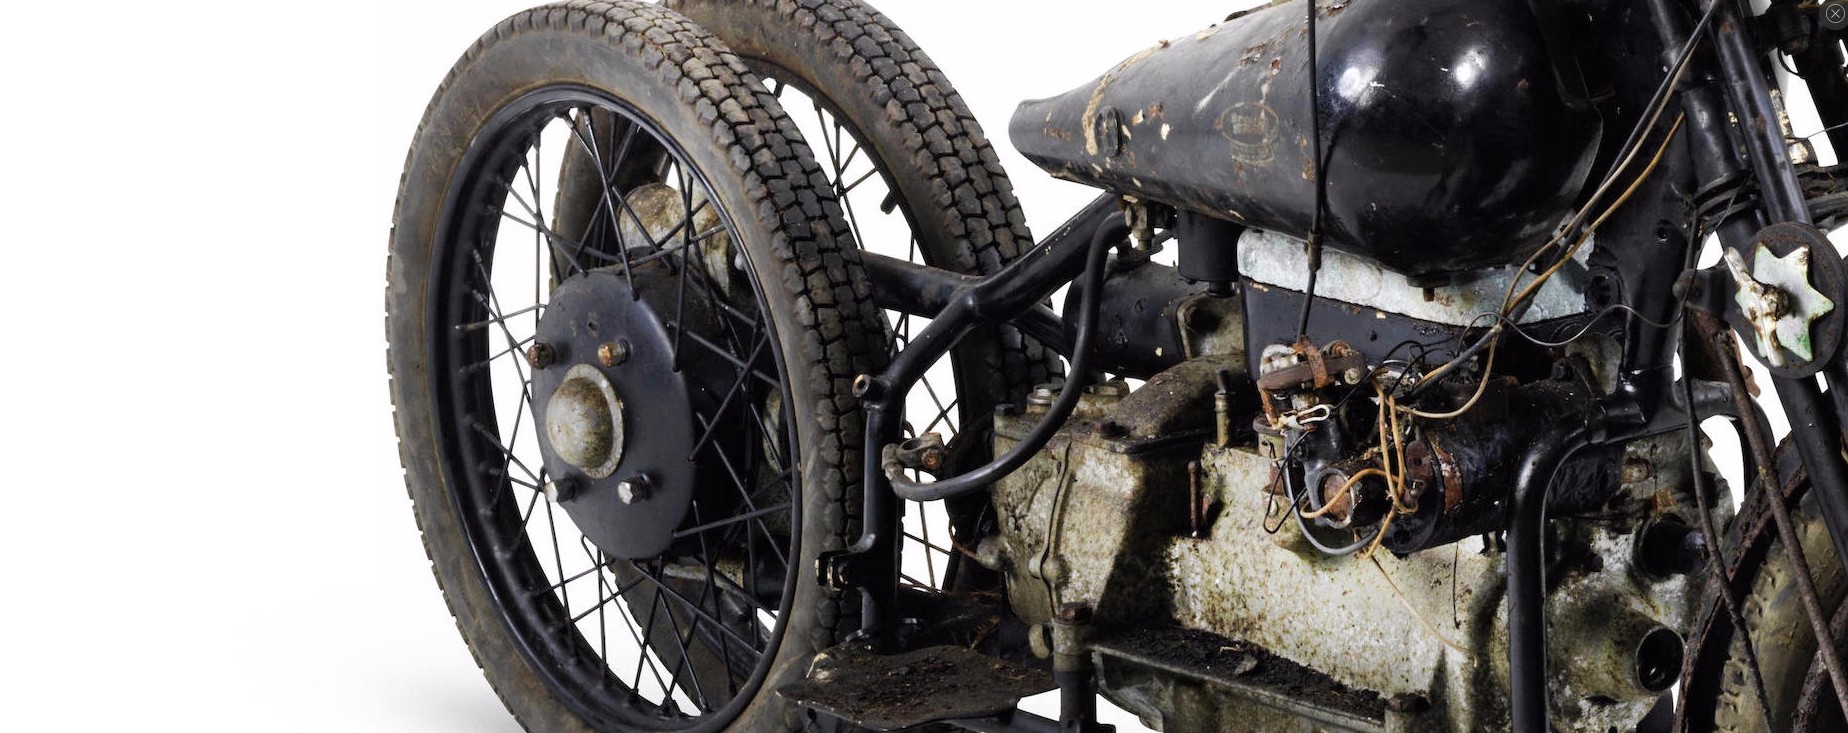 old-brough-superior-bikes-thought-lost-discovered-now-worth-a-small-fortune-photo-gallery_3-autonovosti.me-2